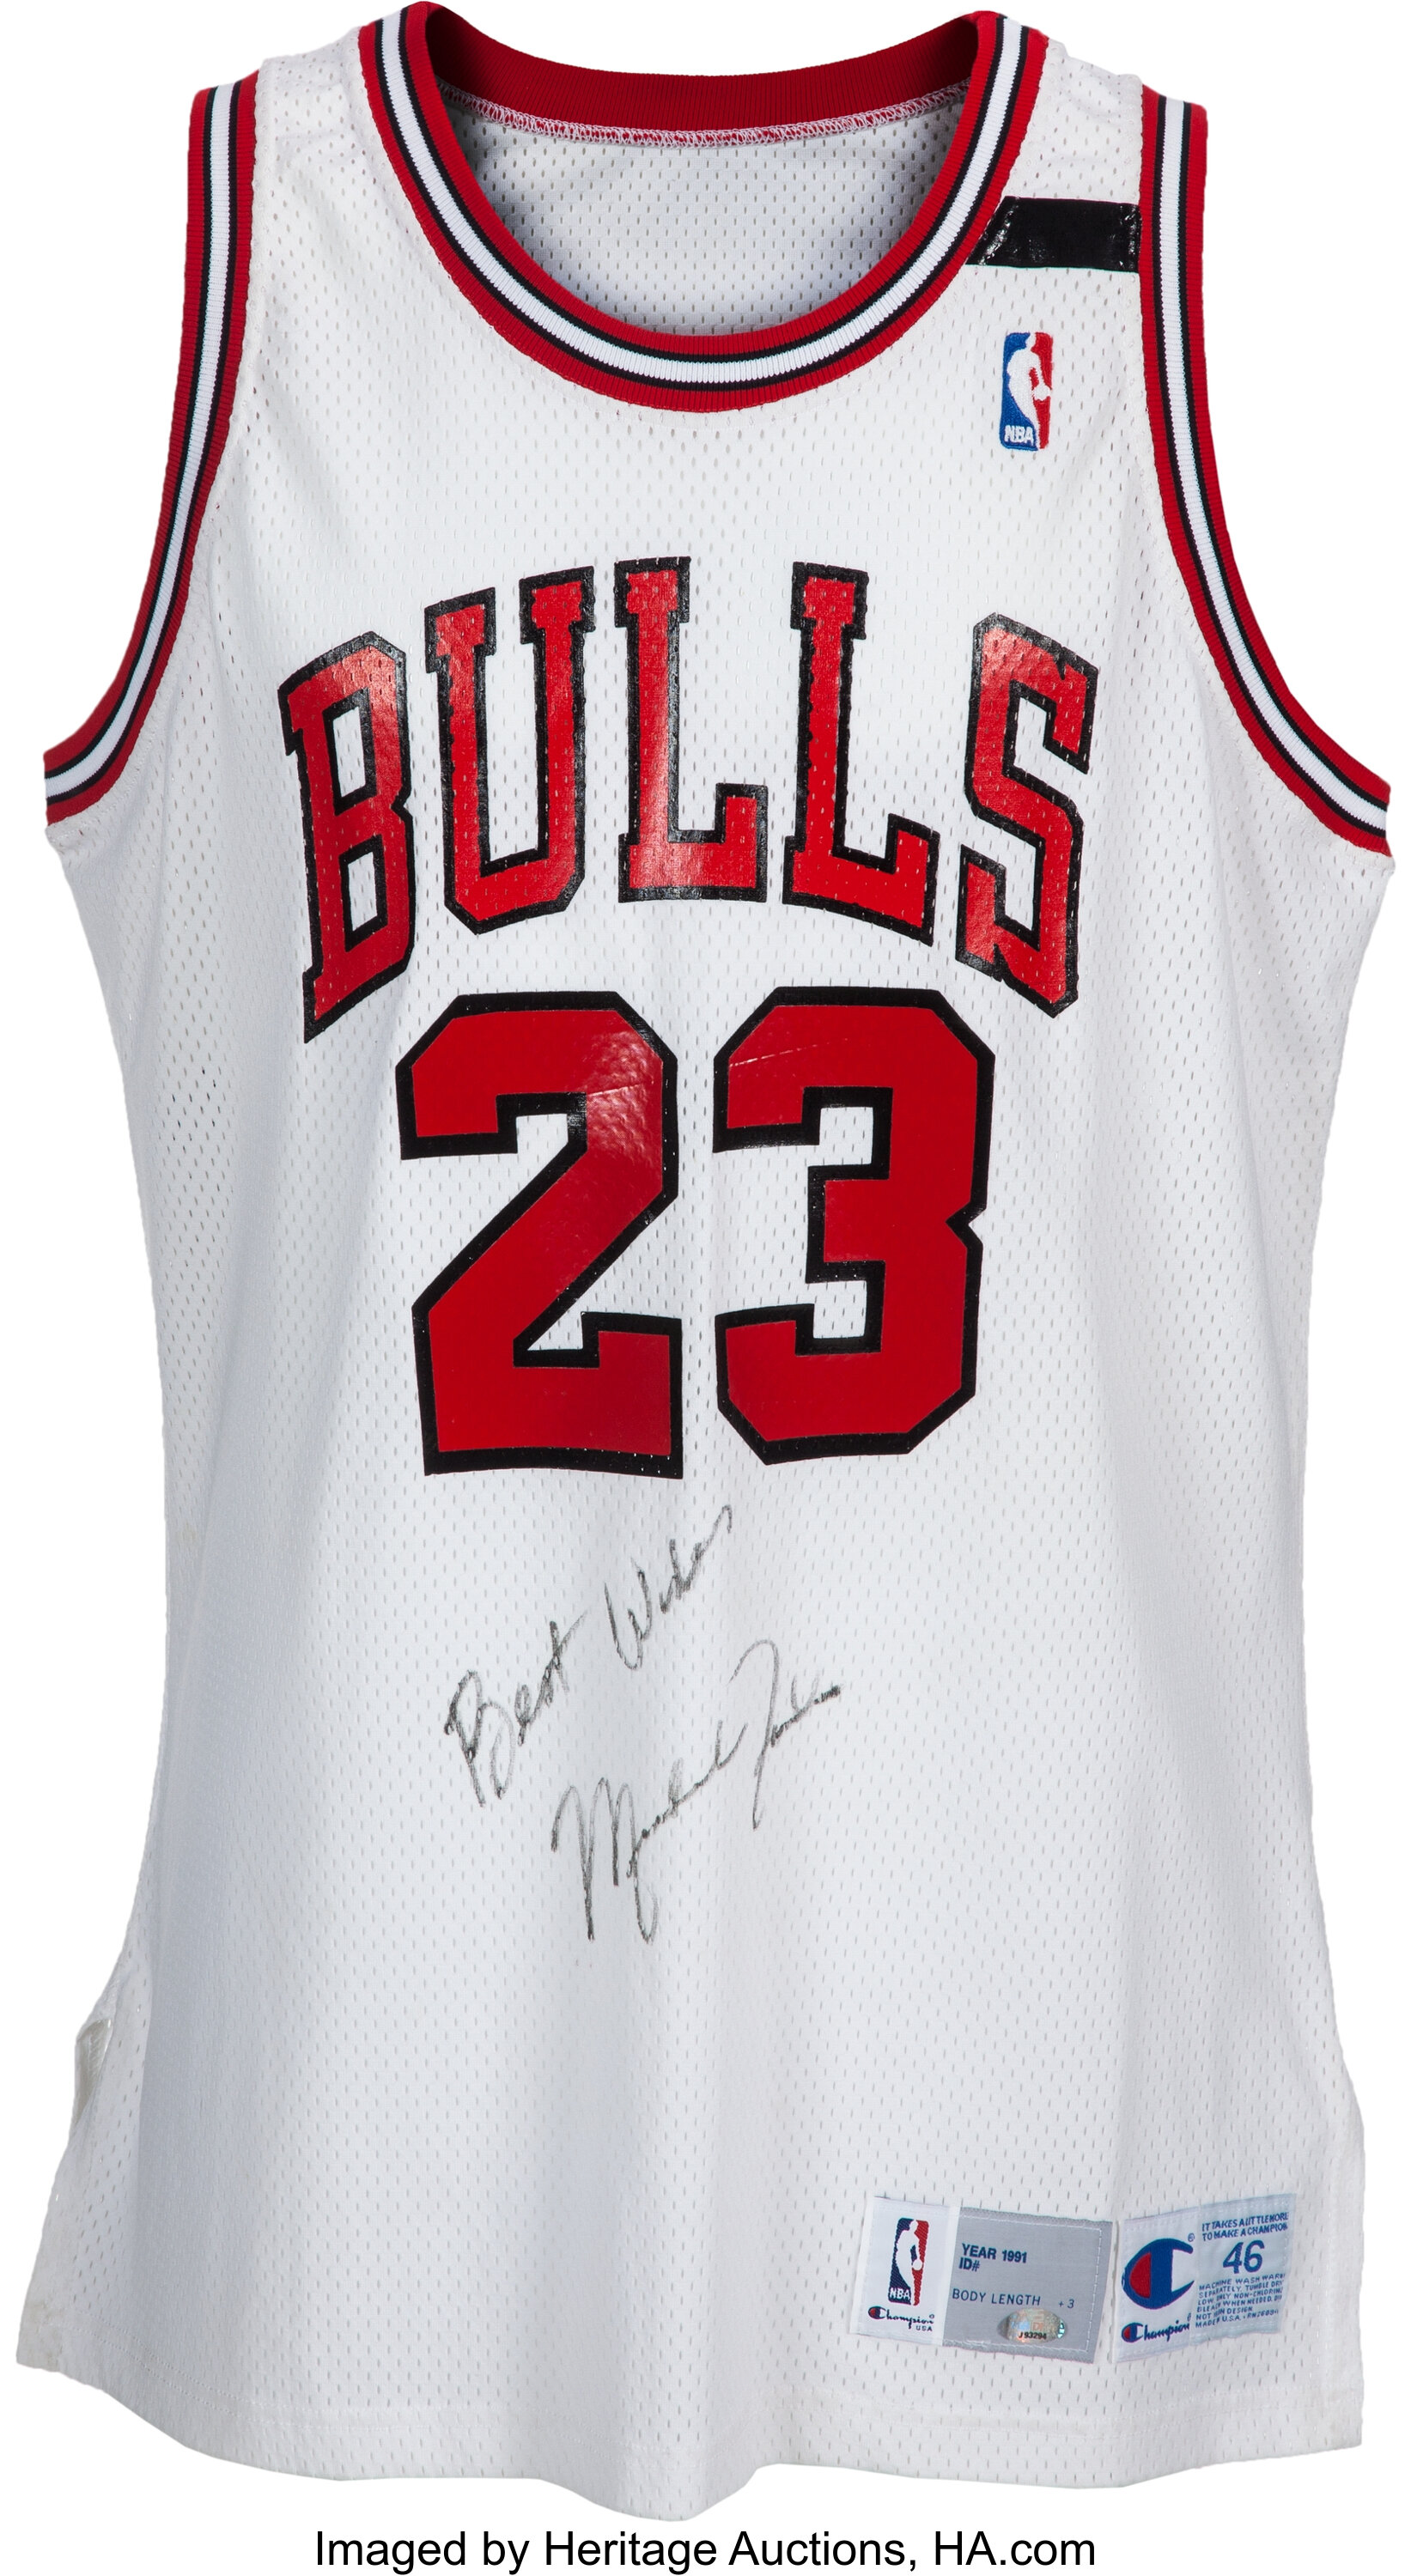 I need help authenticating this game worn jersey. : r/chicagobulls